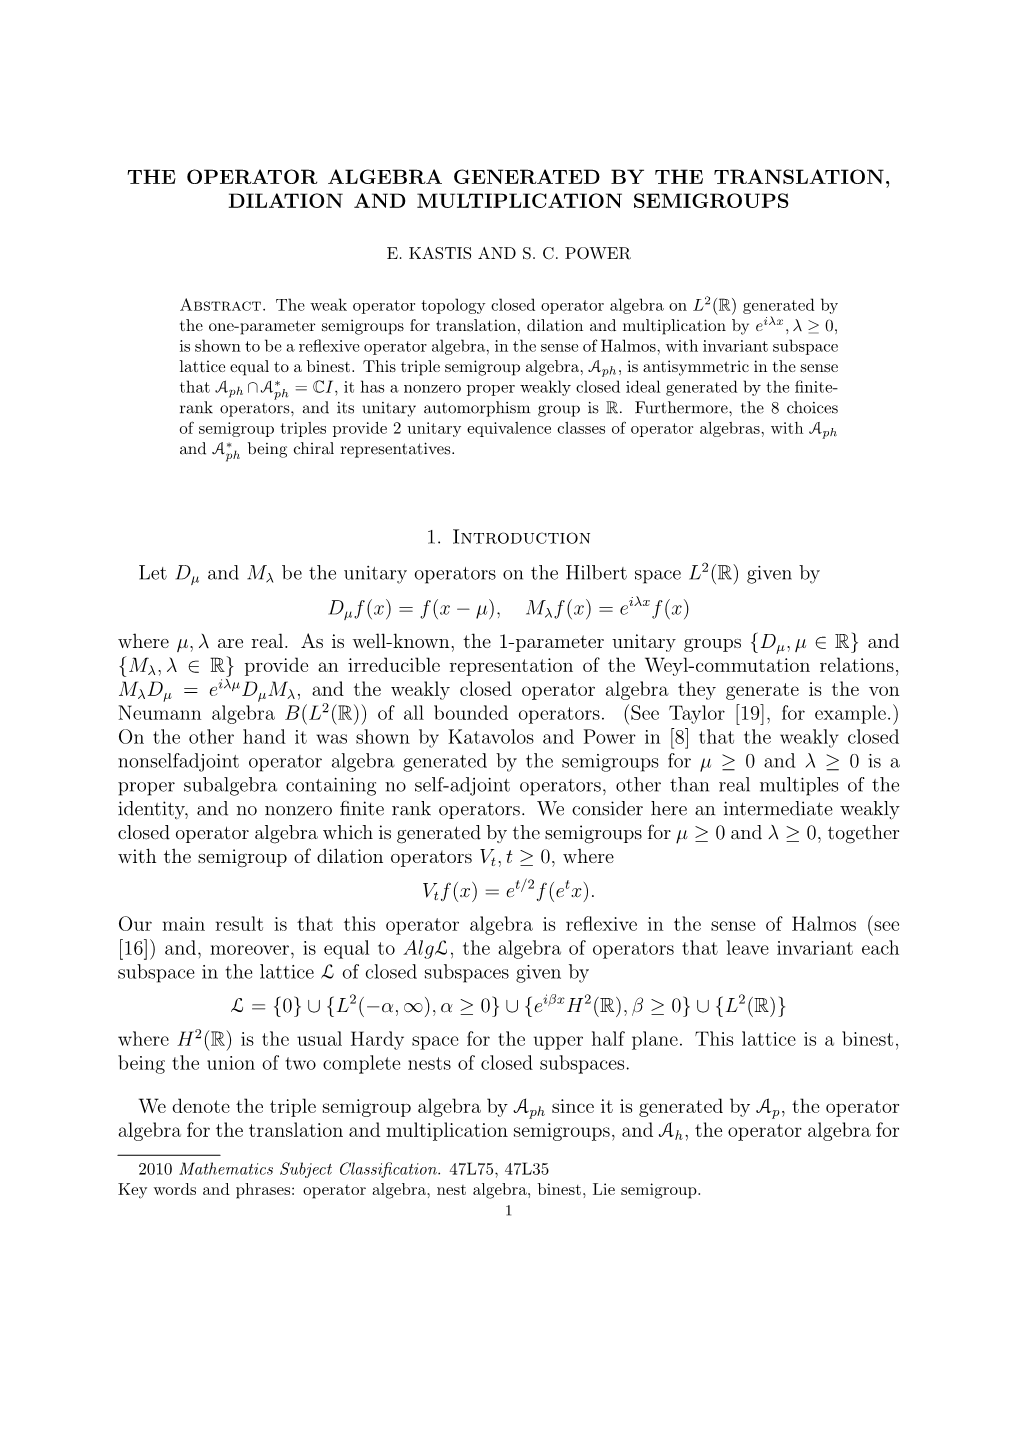 The Operator Algebra Generated by the Translation, Dilation and Multiplication Semigroups